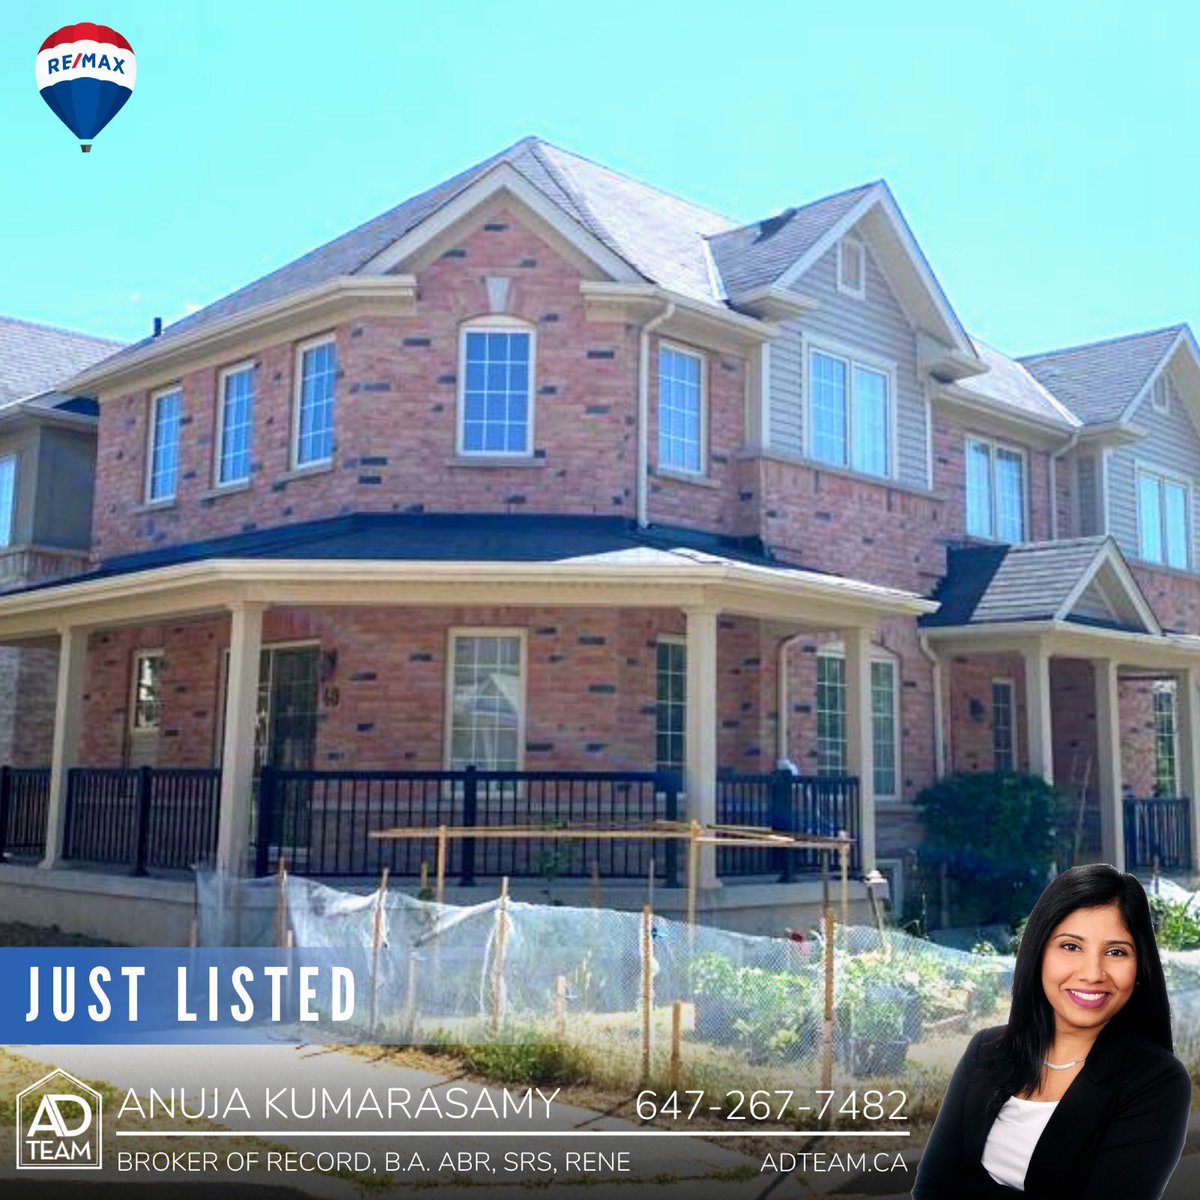 JUST LISTED FOR LEASE🏡 40 BLUNDEN RD., AJAX
💰 $3000
📍Audley/Rossland
🔹4 🛏 & 3 🛁
☎️ Call Us For Your Personal Tour @ 647-267-7482

#justlisted #forlease #forLeaseajax #ajaxproperties #Townhomeforlease #ajaxhomes #adteam #anujatherealtor #remaxrealtron #1realtor #ajaxrealtor